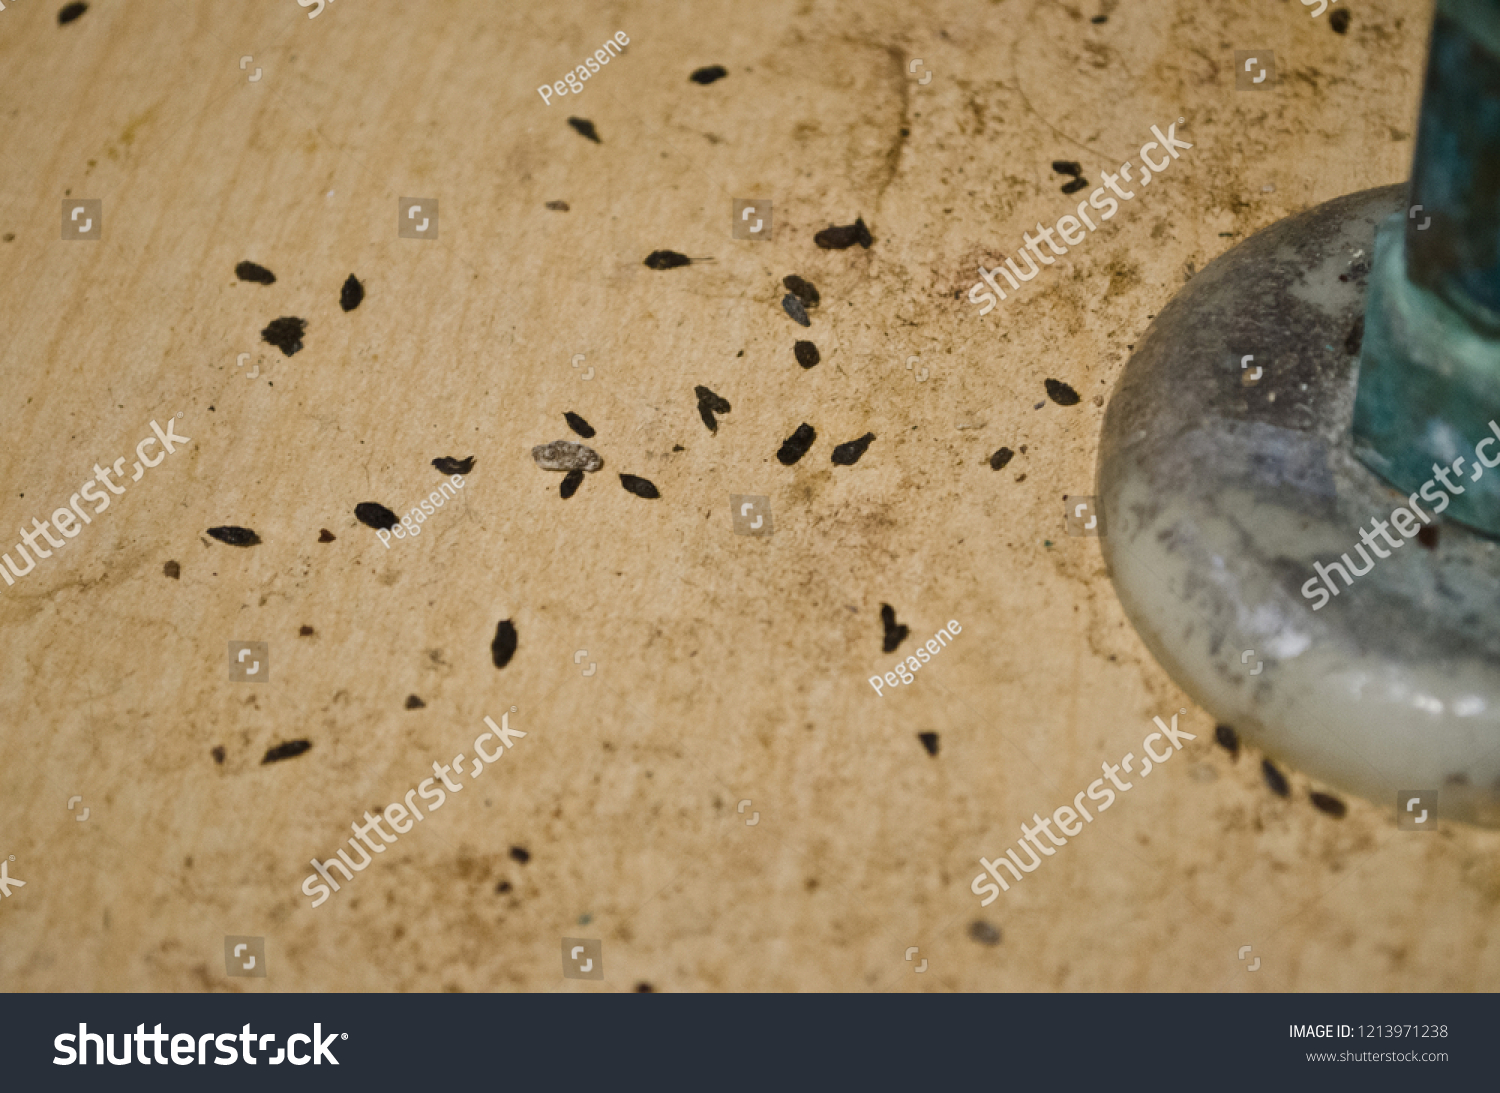 Mouse Poop Turds Feces Under Bathroom Stock Photo Edit Now 1213971238,Chipmunk Repellent Home Remedy